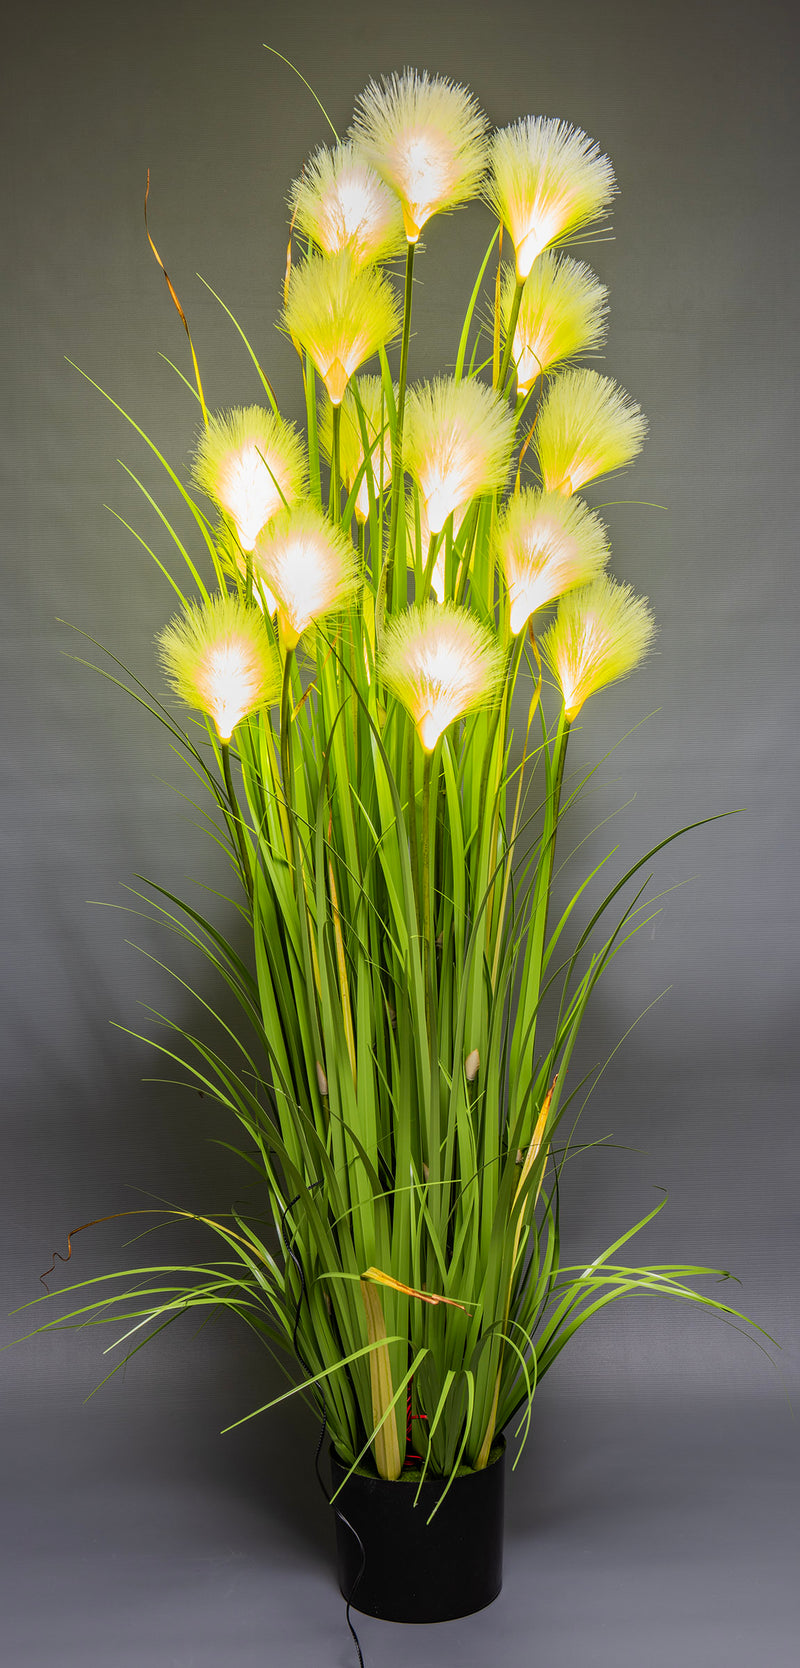 THE GRANGE COLLECTION LARGE ARTIFICIAL FLOWERS WITH FIBER OPTIC